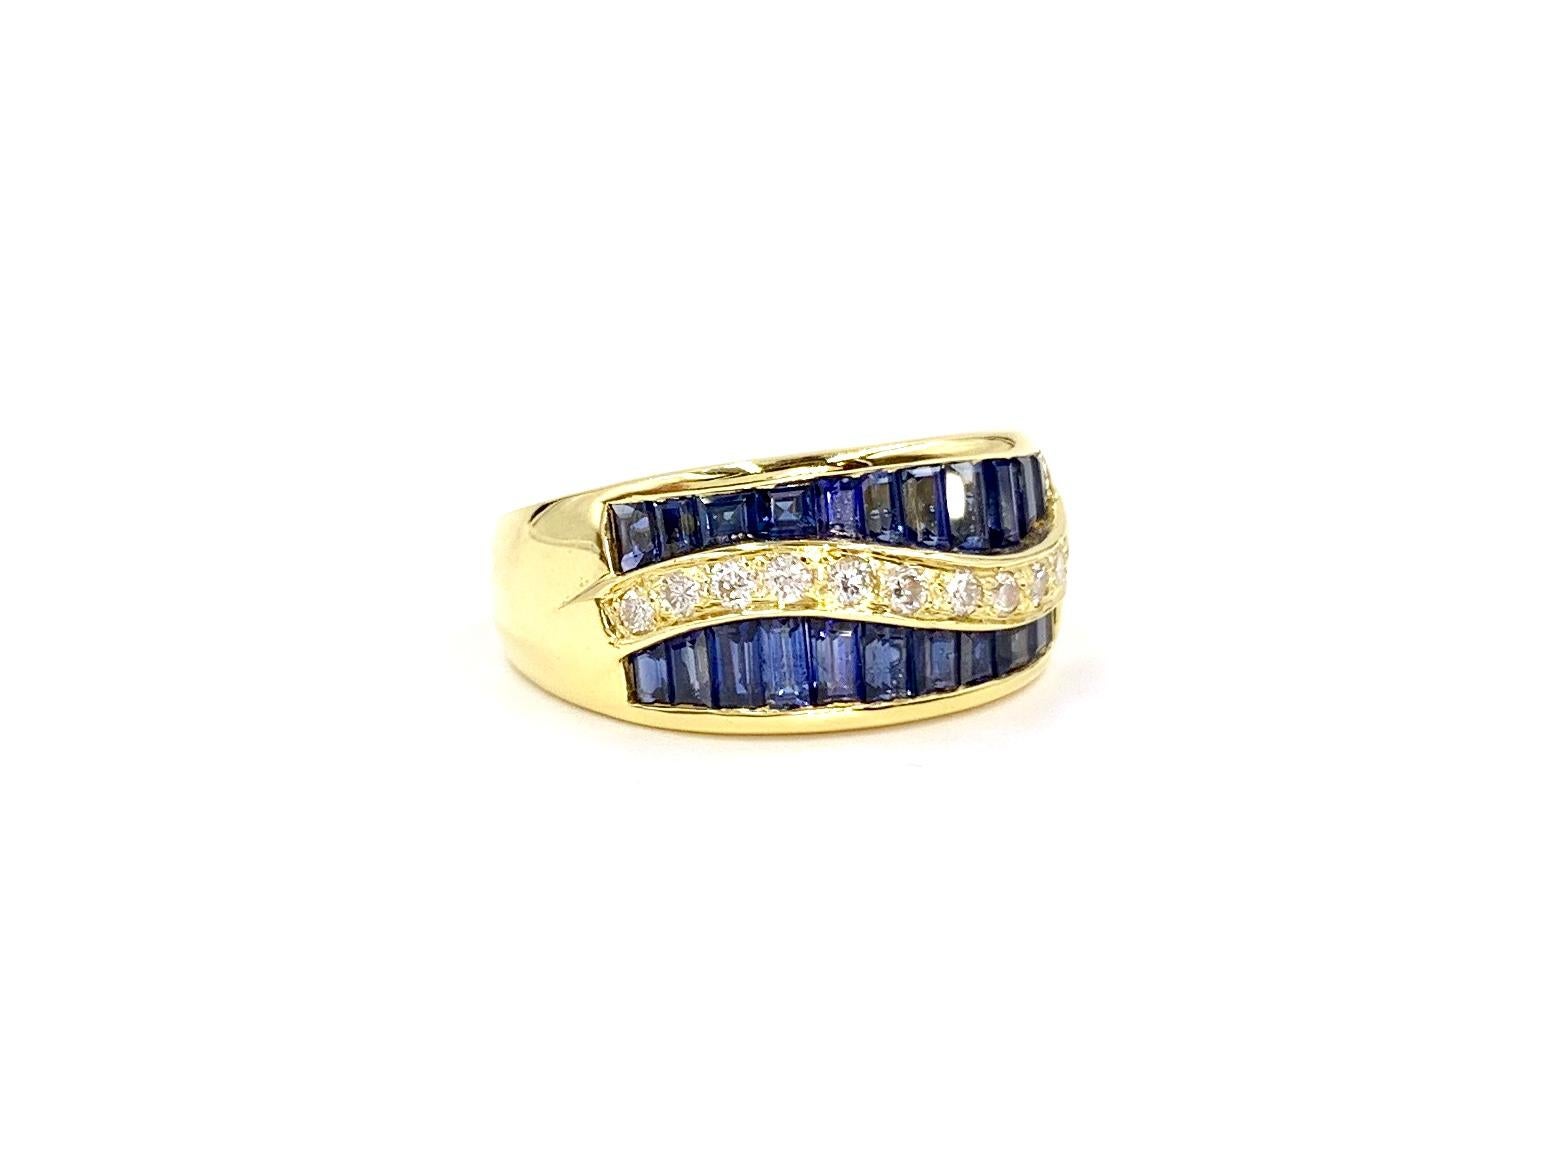 Crafted with extraordinary quality by designer Gregg Ruth. This 18 karat yellow gold 10mm wide modern ring features vivid, well saturated baguette cut blue sapphires at 2.37 carats total weight and a wavy line of round brilliant diamonds at .23